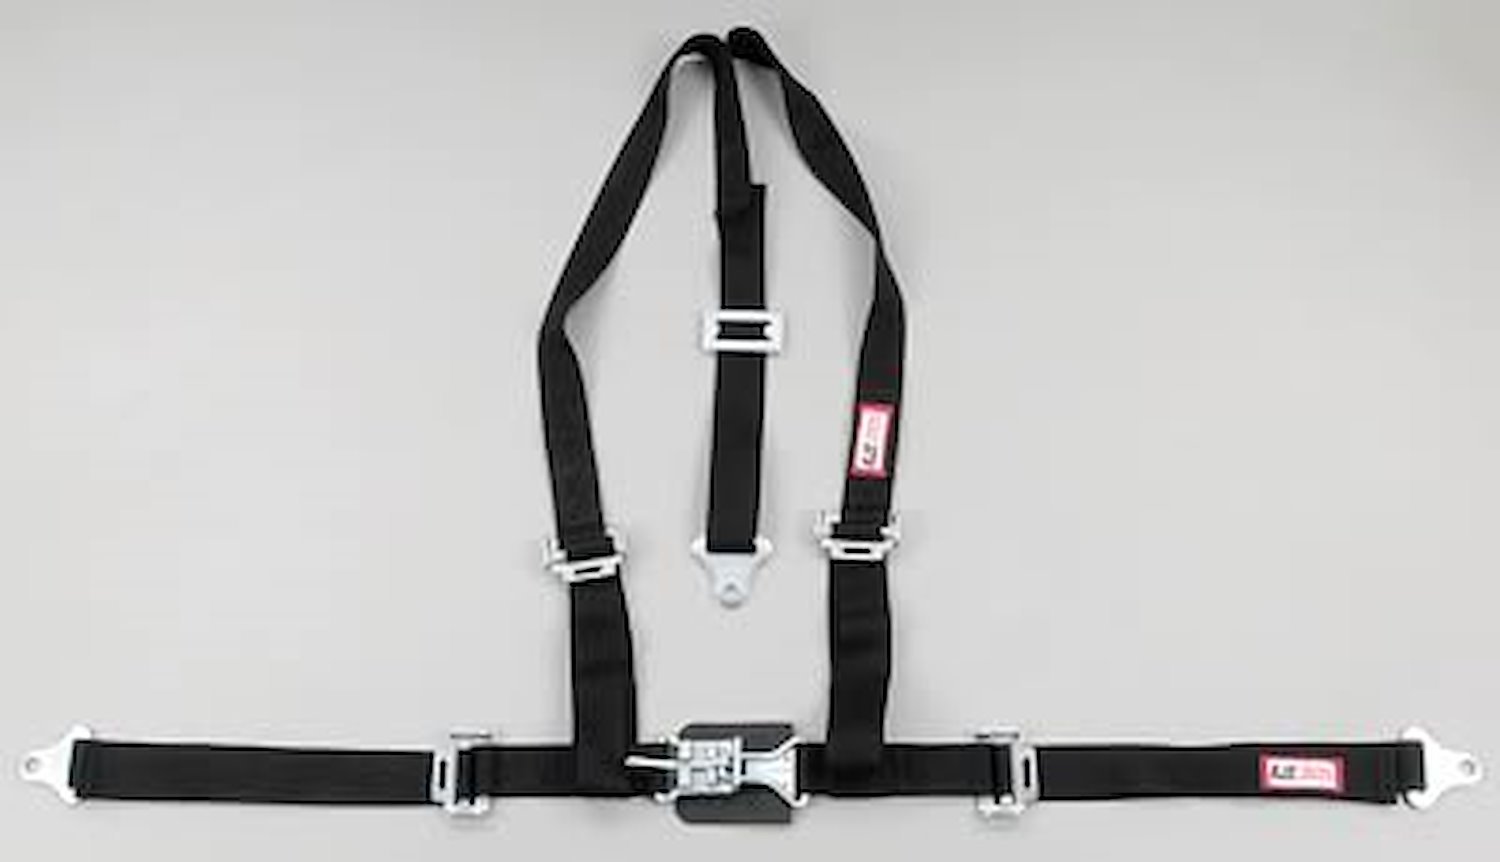 NON-SFI L&L HARNESS 2 PULL UP Lap Belt SNAP SEWN IN 2 S.H. Y FLOOR Mount w/STERNUM STRAP WRAP/BOLT GRAY